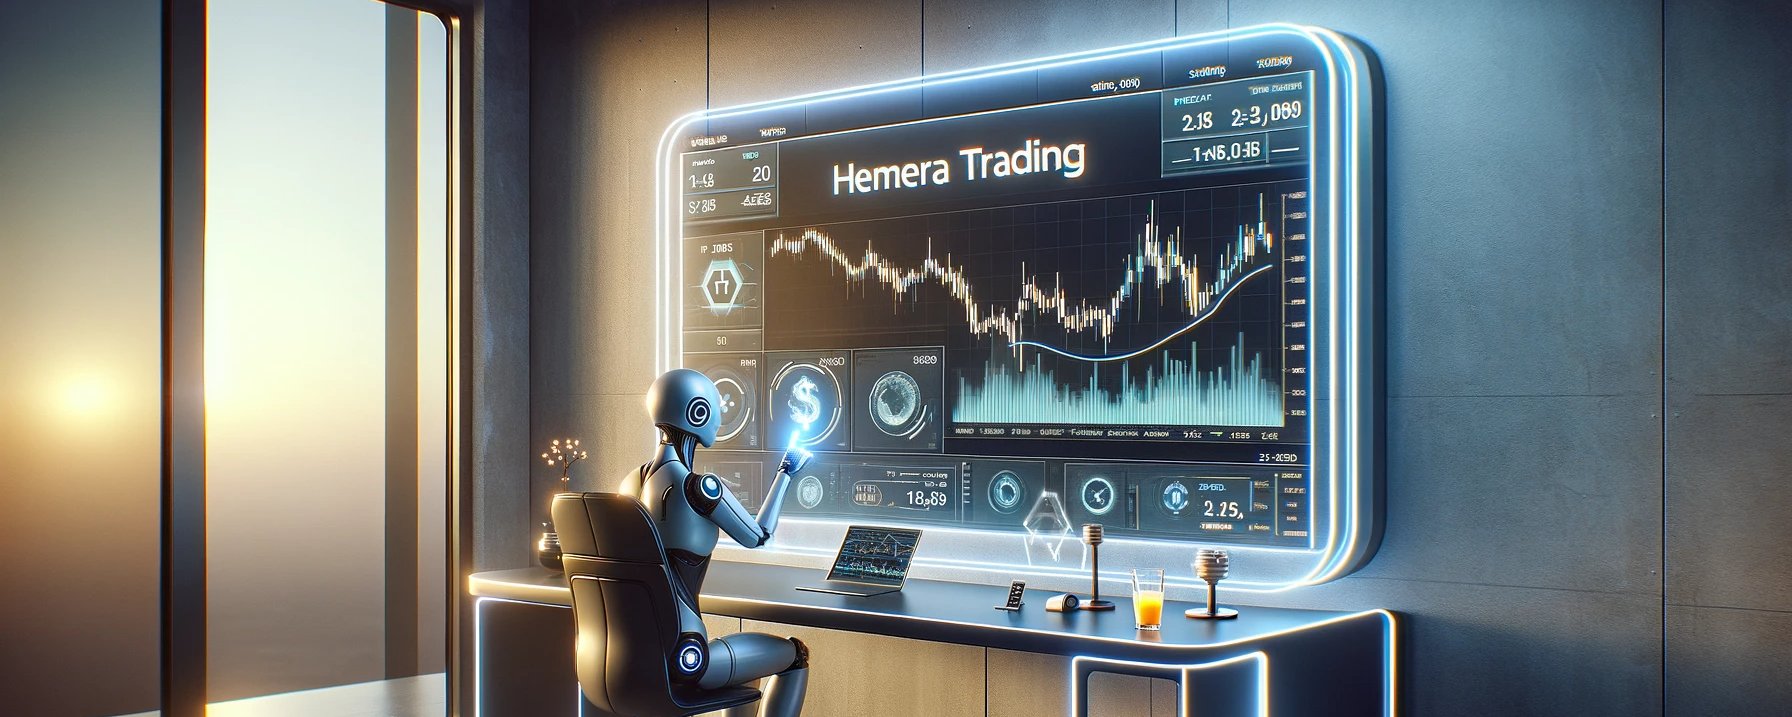 Hemera Trading Introduces Game-Changing AI Smart Trading System